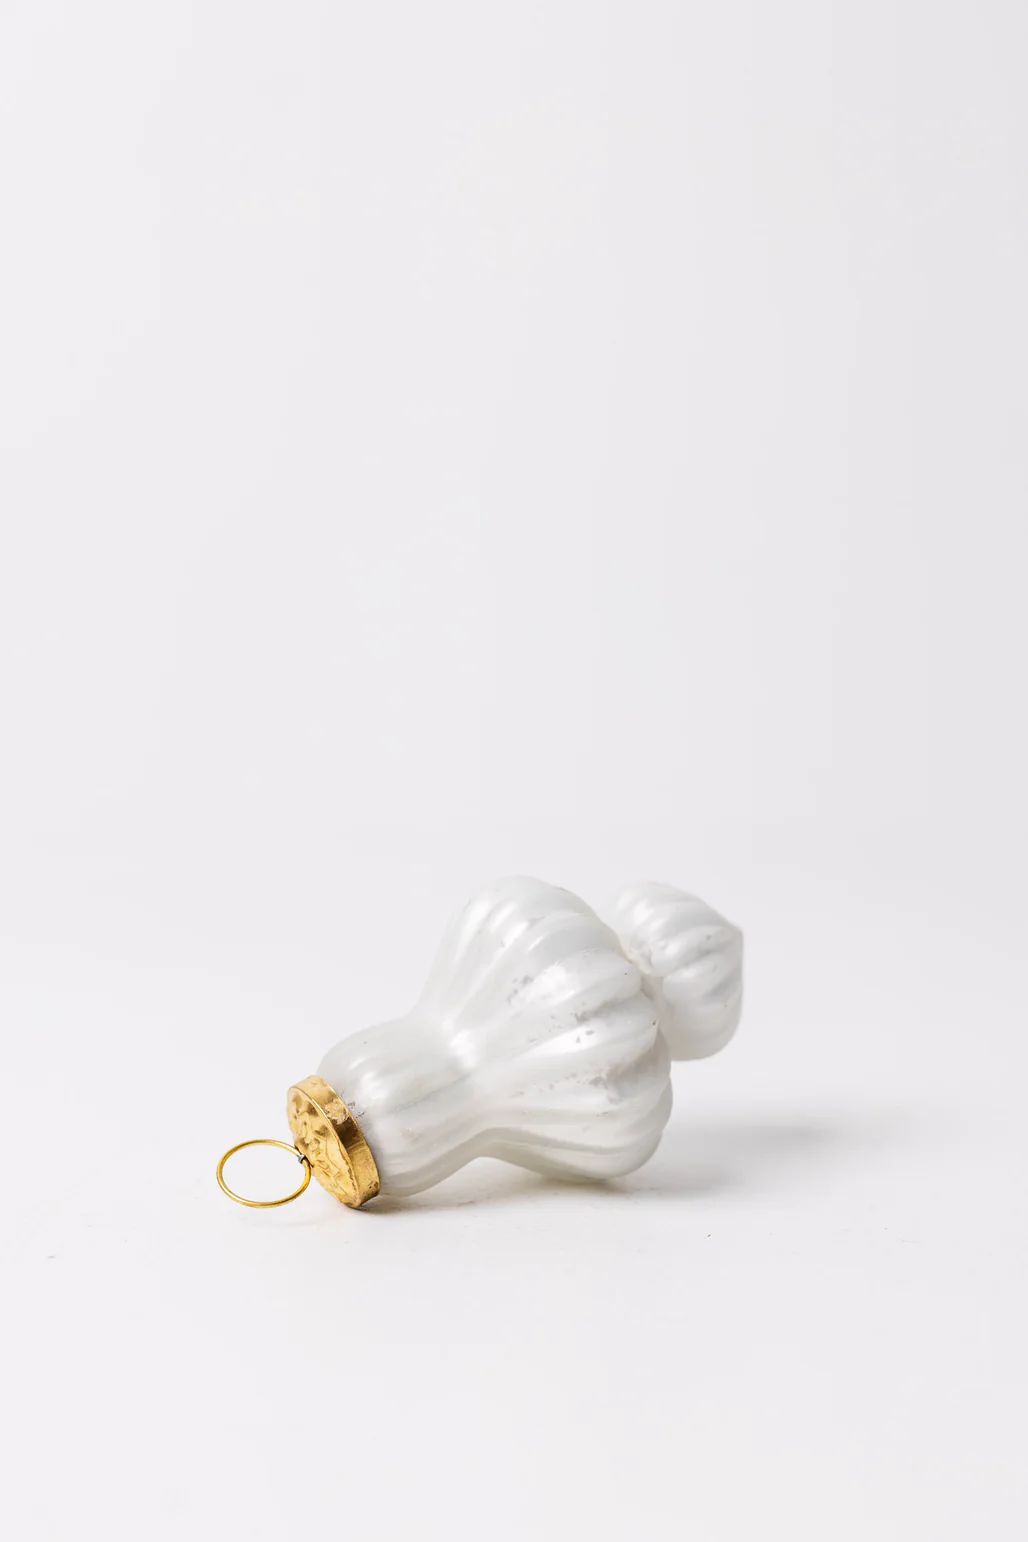 Frostine Ornament | THELIFESTYLEDCO